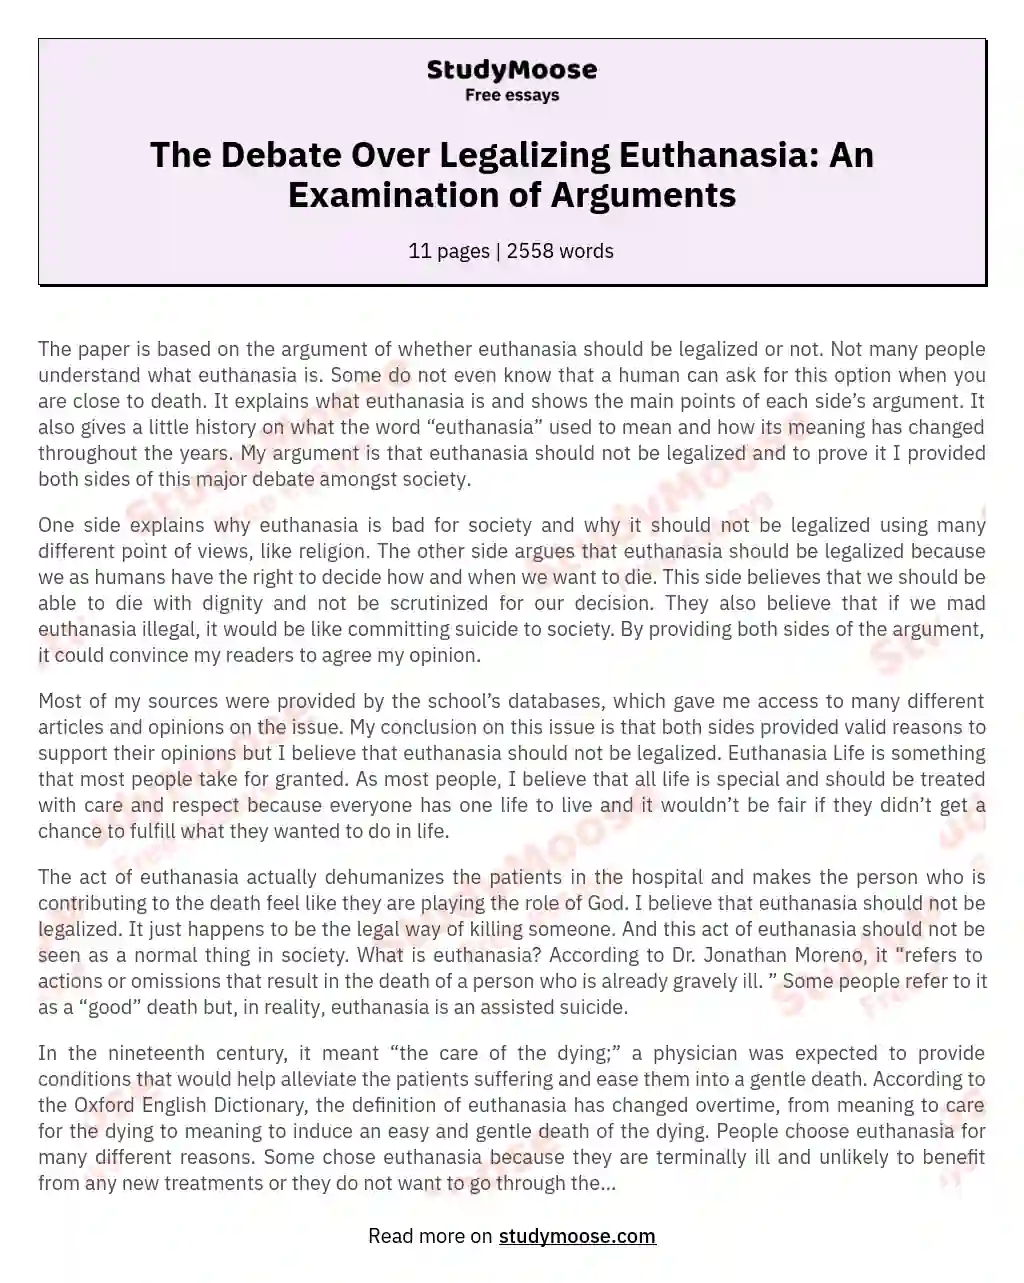 The Debate Over Legalizing Euthanasia: An Examination of Arguments essay